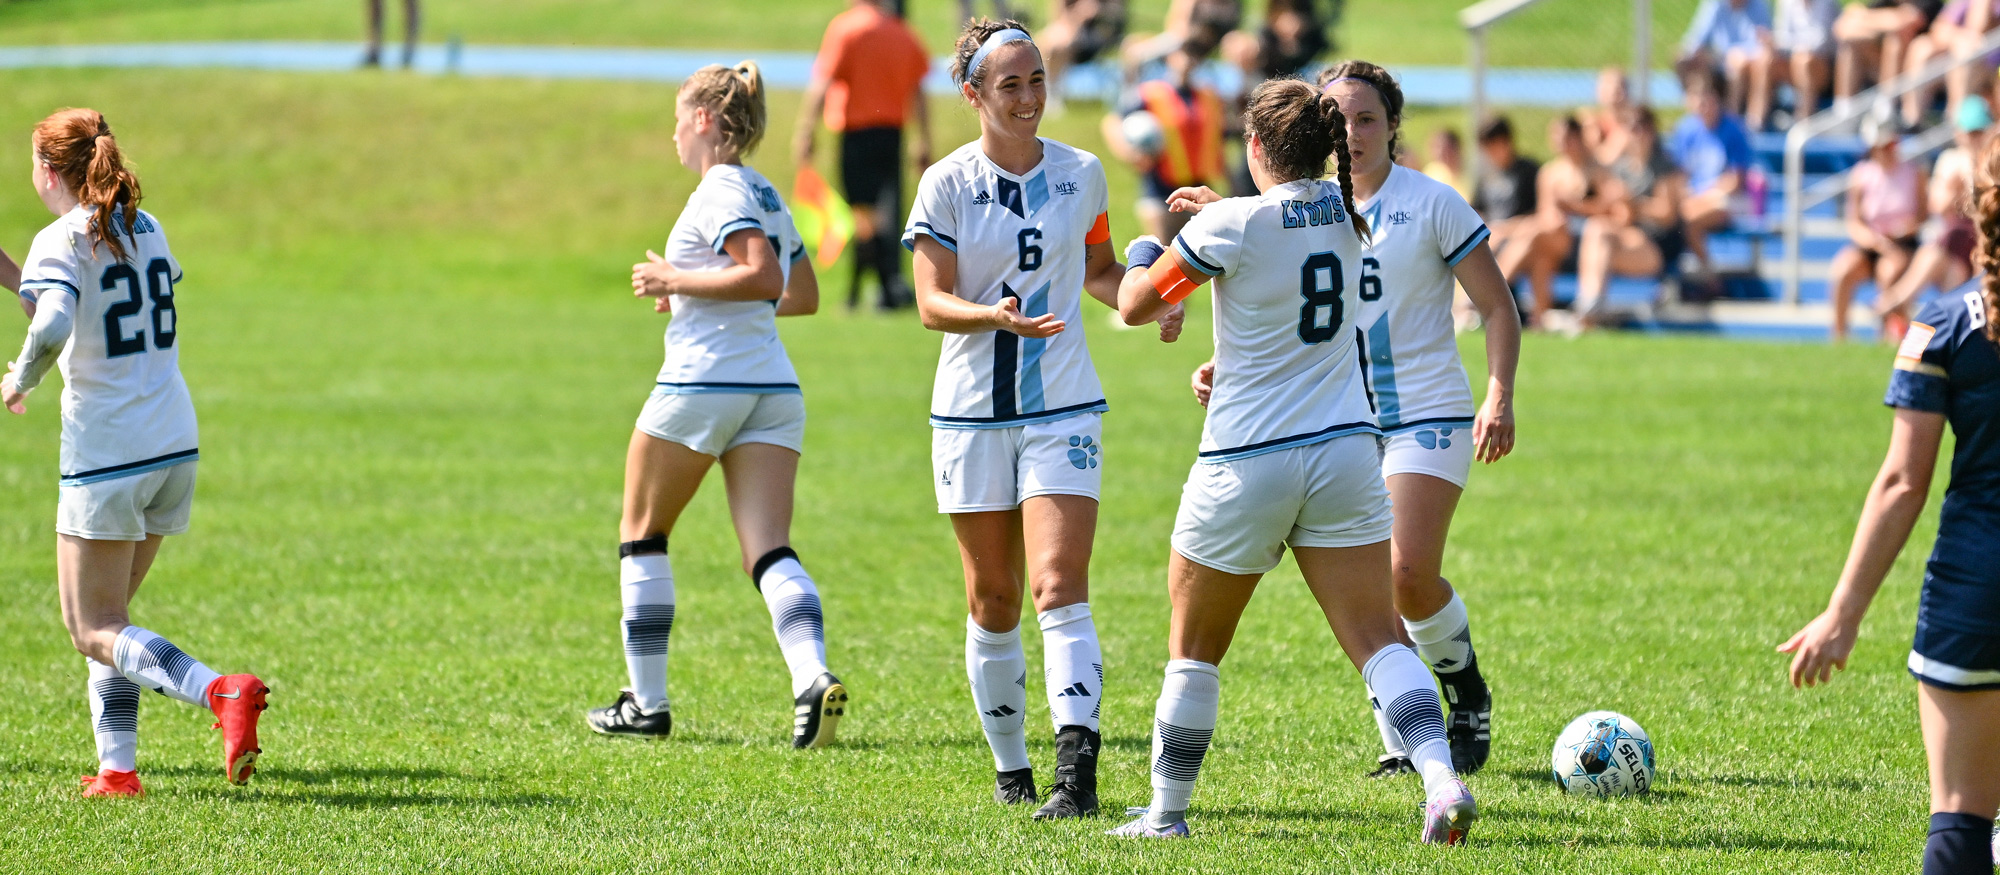 Sonia McCollum (6) congratulates fellow captain Anna Kennedy (8) after Kennedy scored the first of her two goals on penalty kicks during Mount Holyoke's 5-0 win over Massachusetts Maritime on Sept. 4, 2023. (Bob Blanchard/RJB Sports)